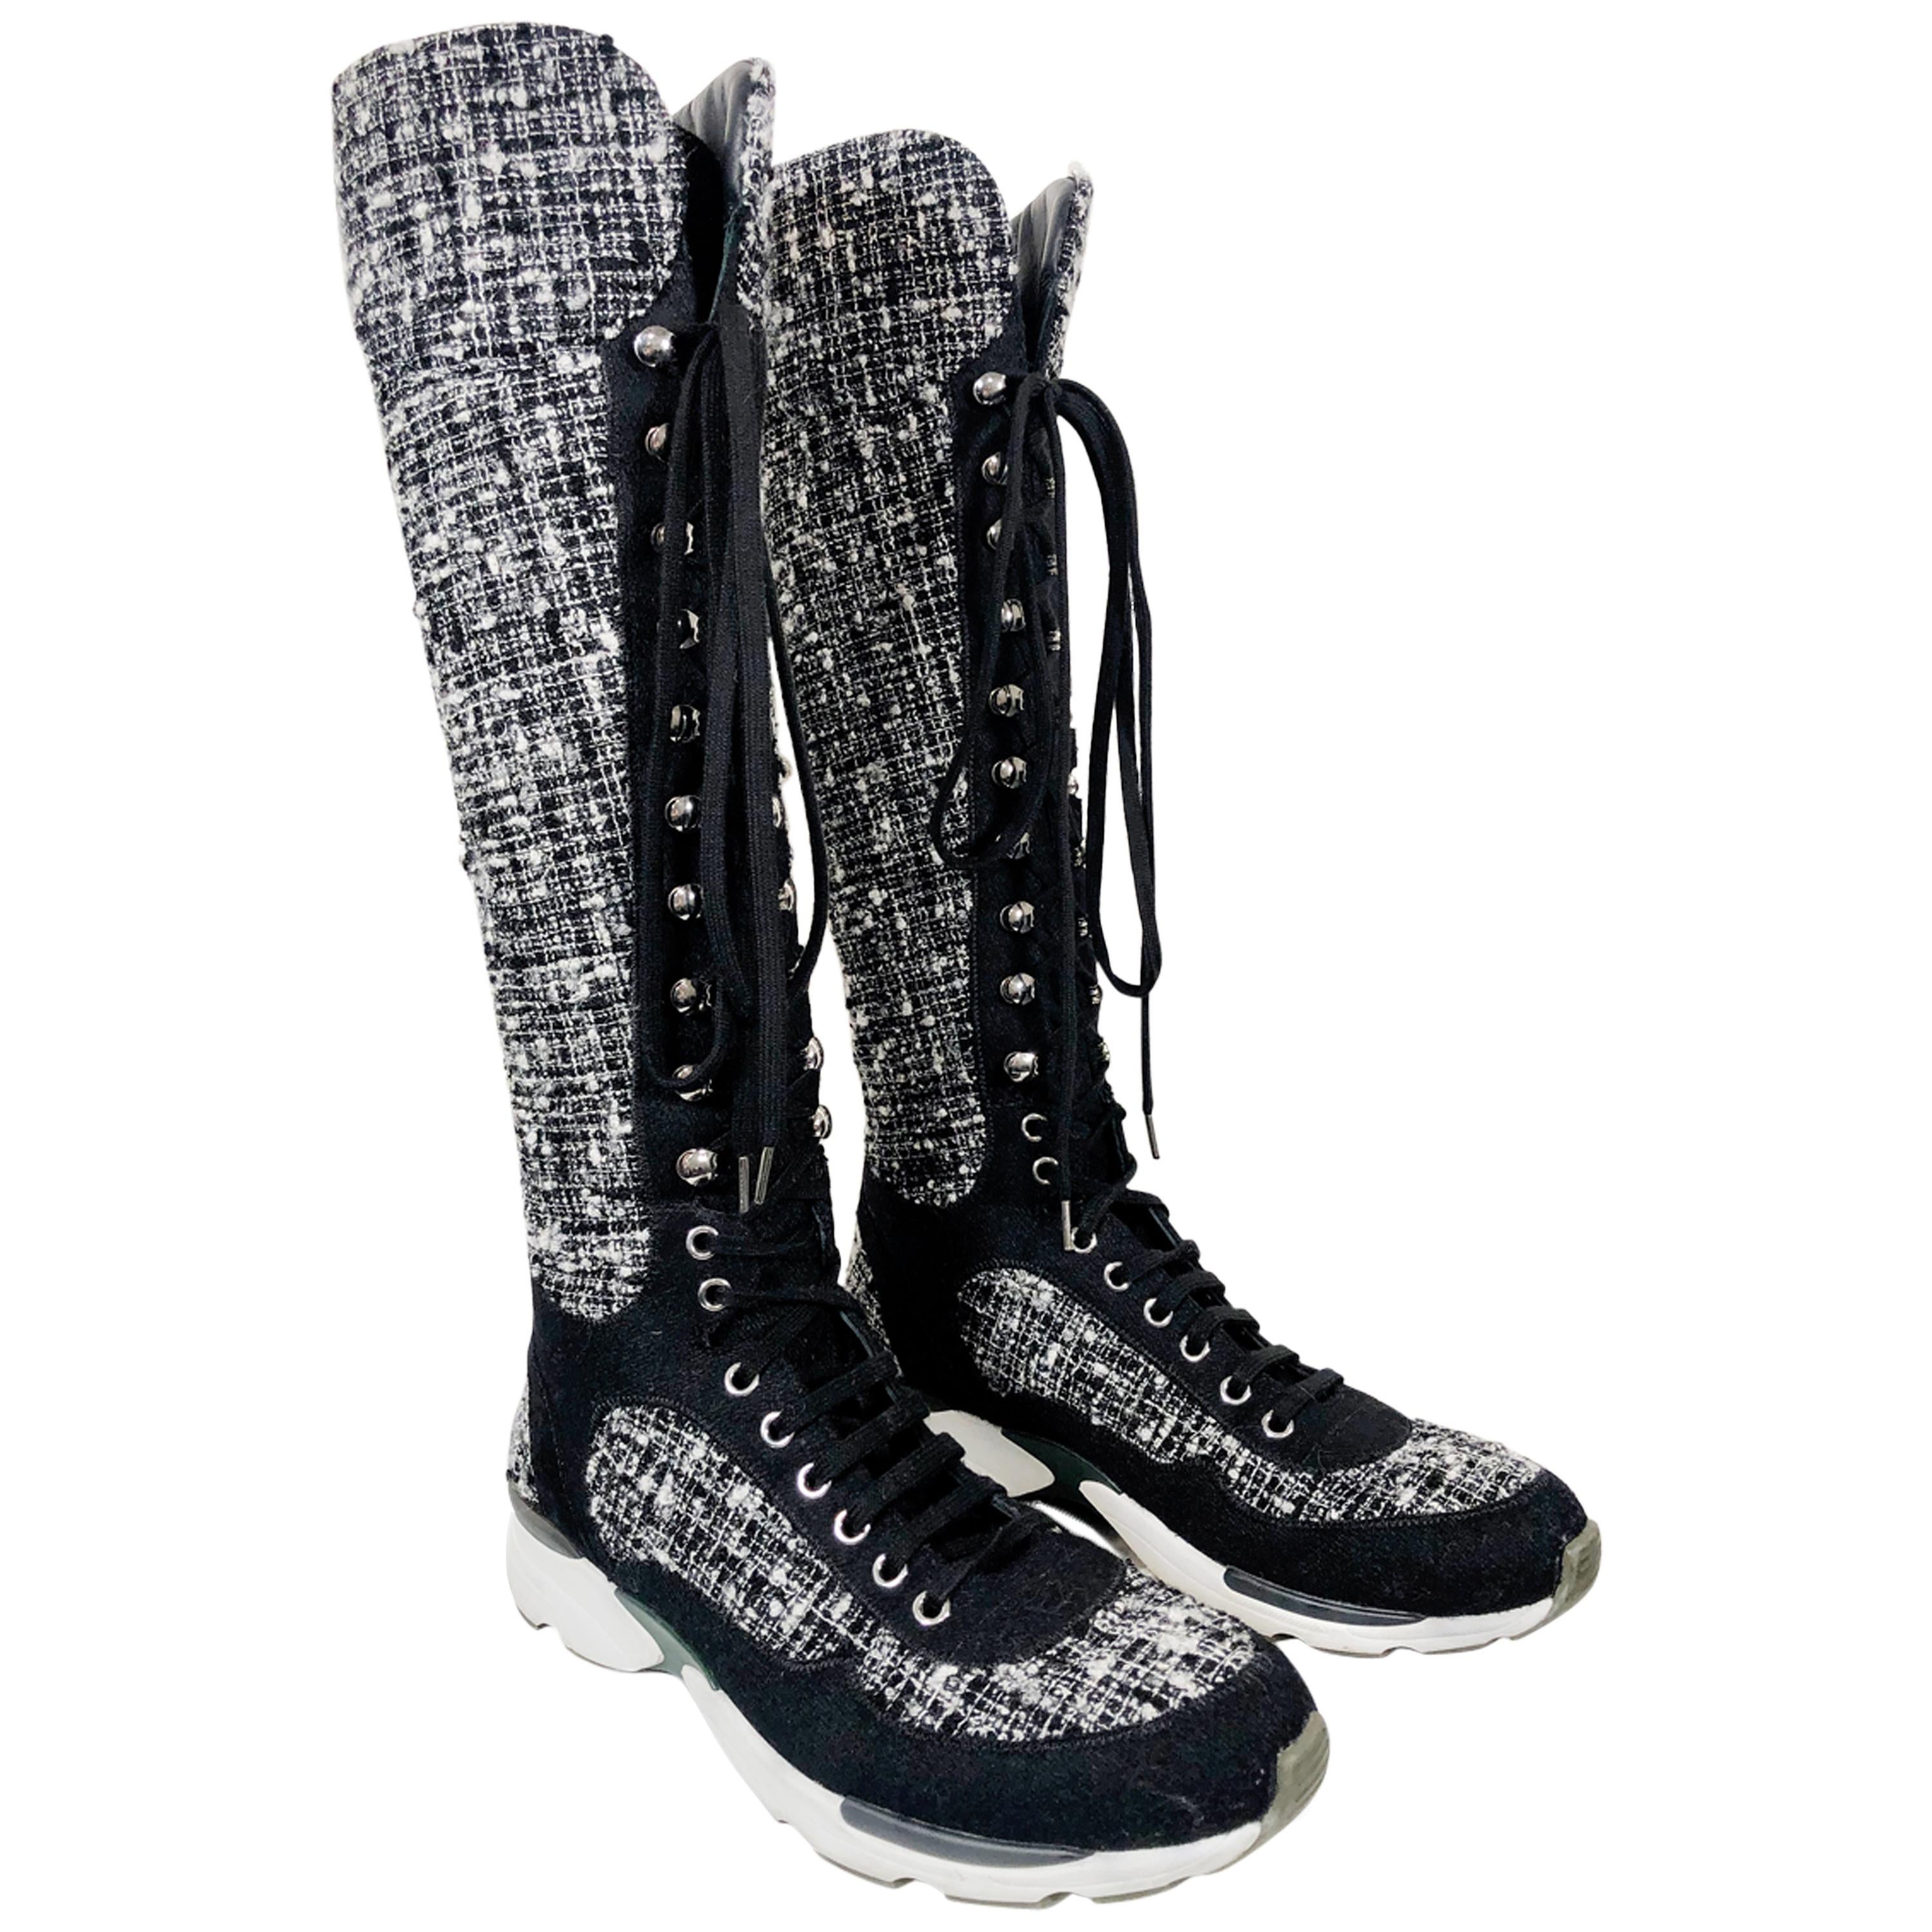 Thigh High Canvas Lace up Sneaker Boots Black and White | RebelsMarket